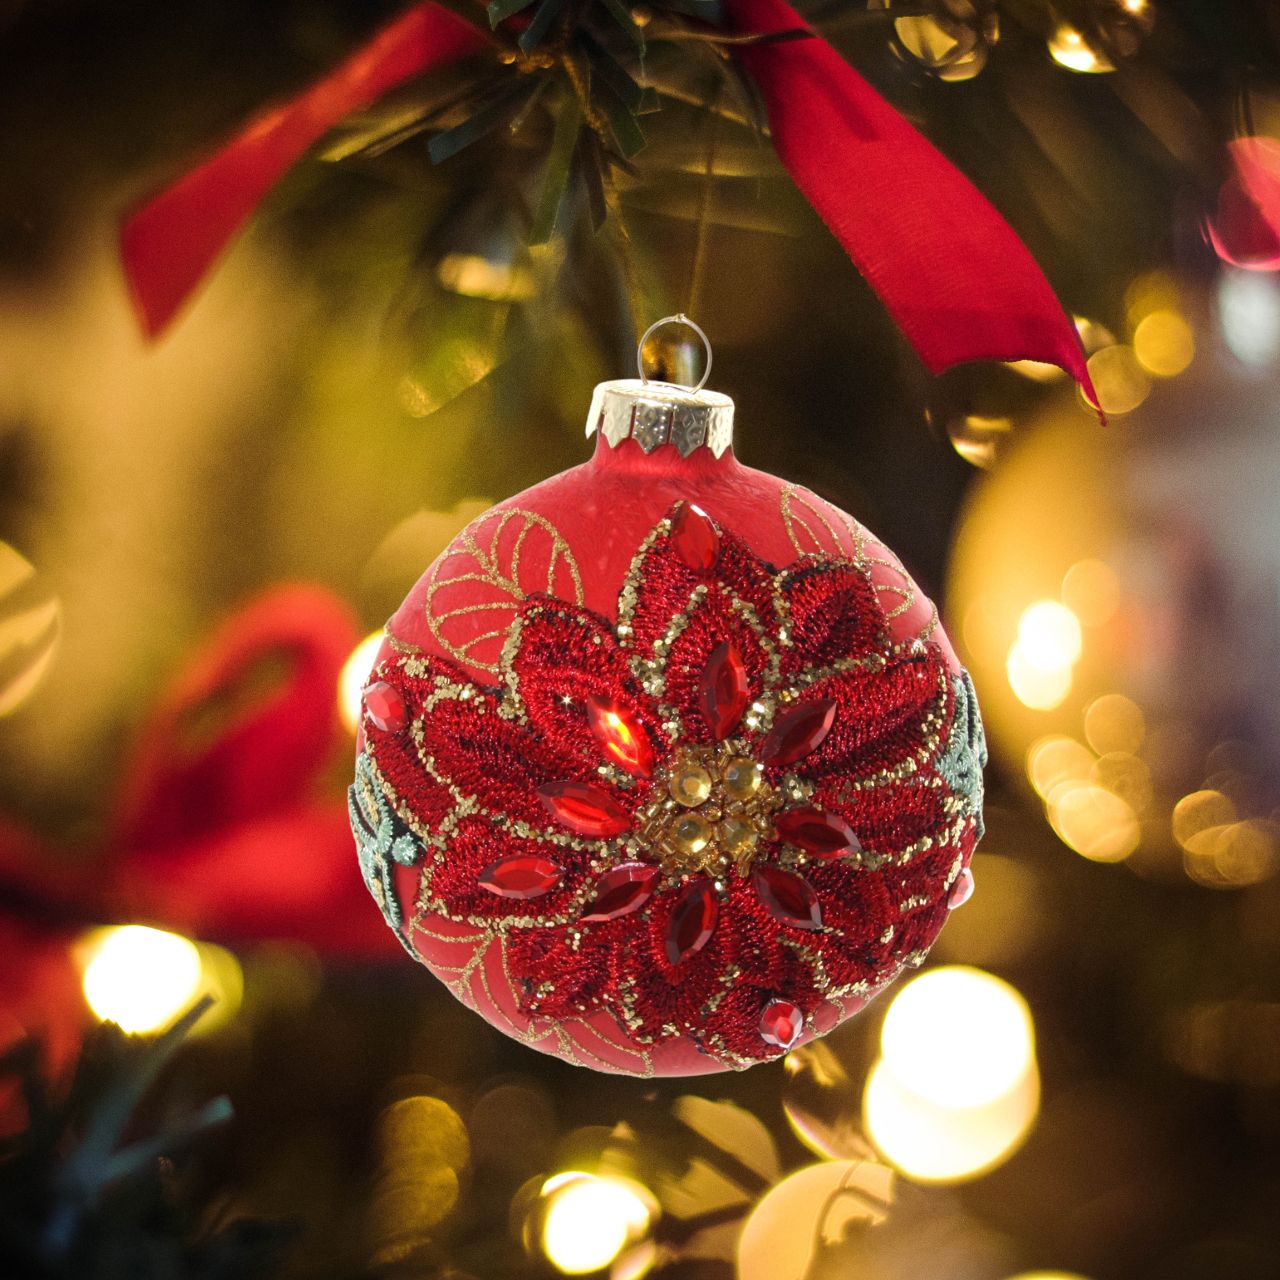 Shishi Glass Red Ball Frosted with Poinsettia Embroidery Hanging Ornament  Browse our beautiful range of luxury festive Christmas tree decorations, baubles & ornaments for your tree this Christmas.